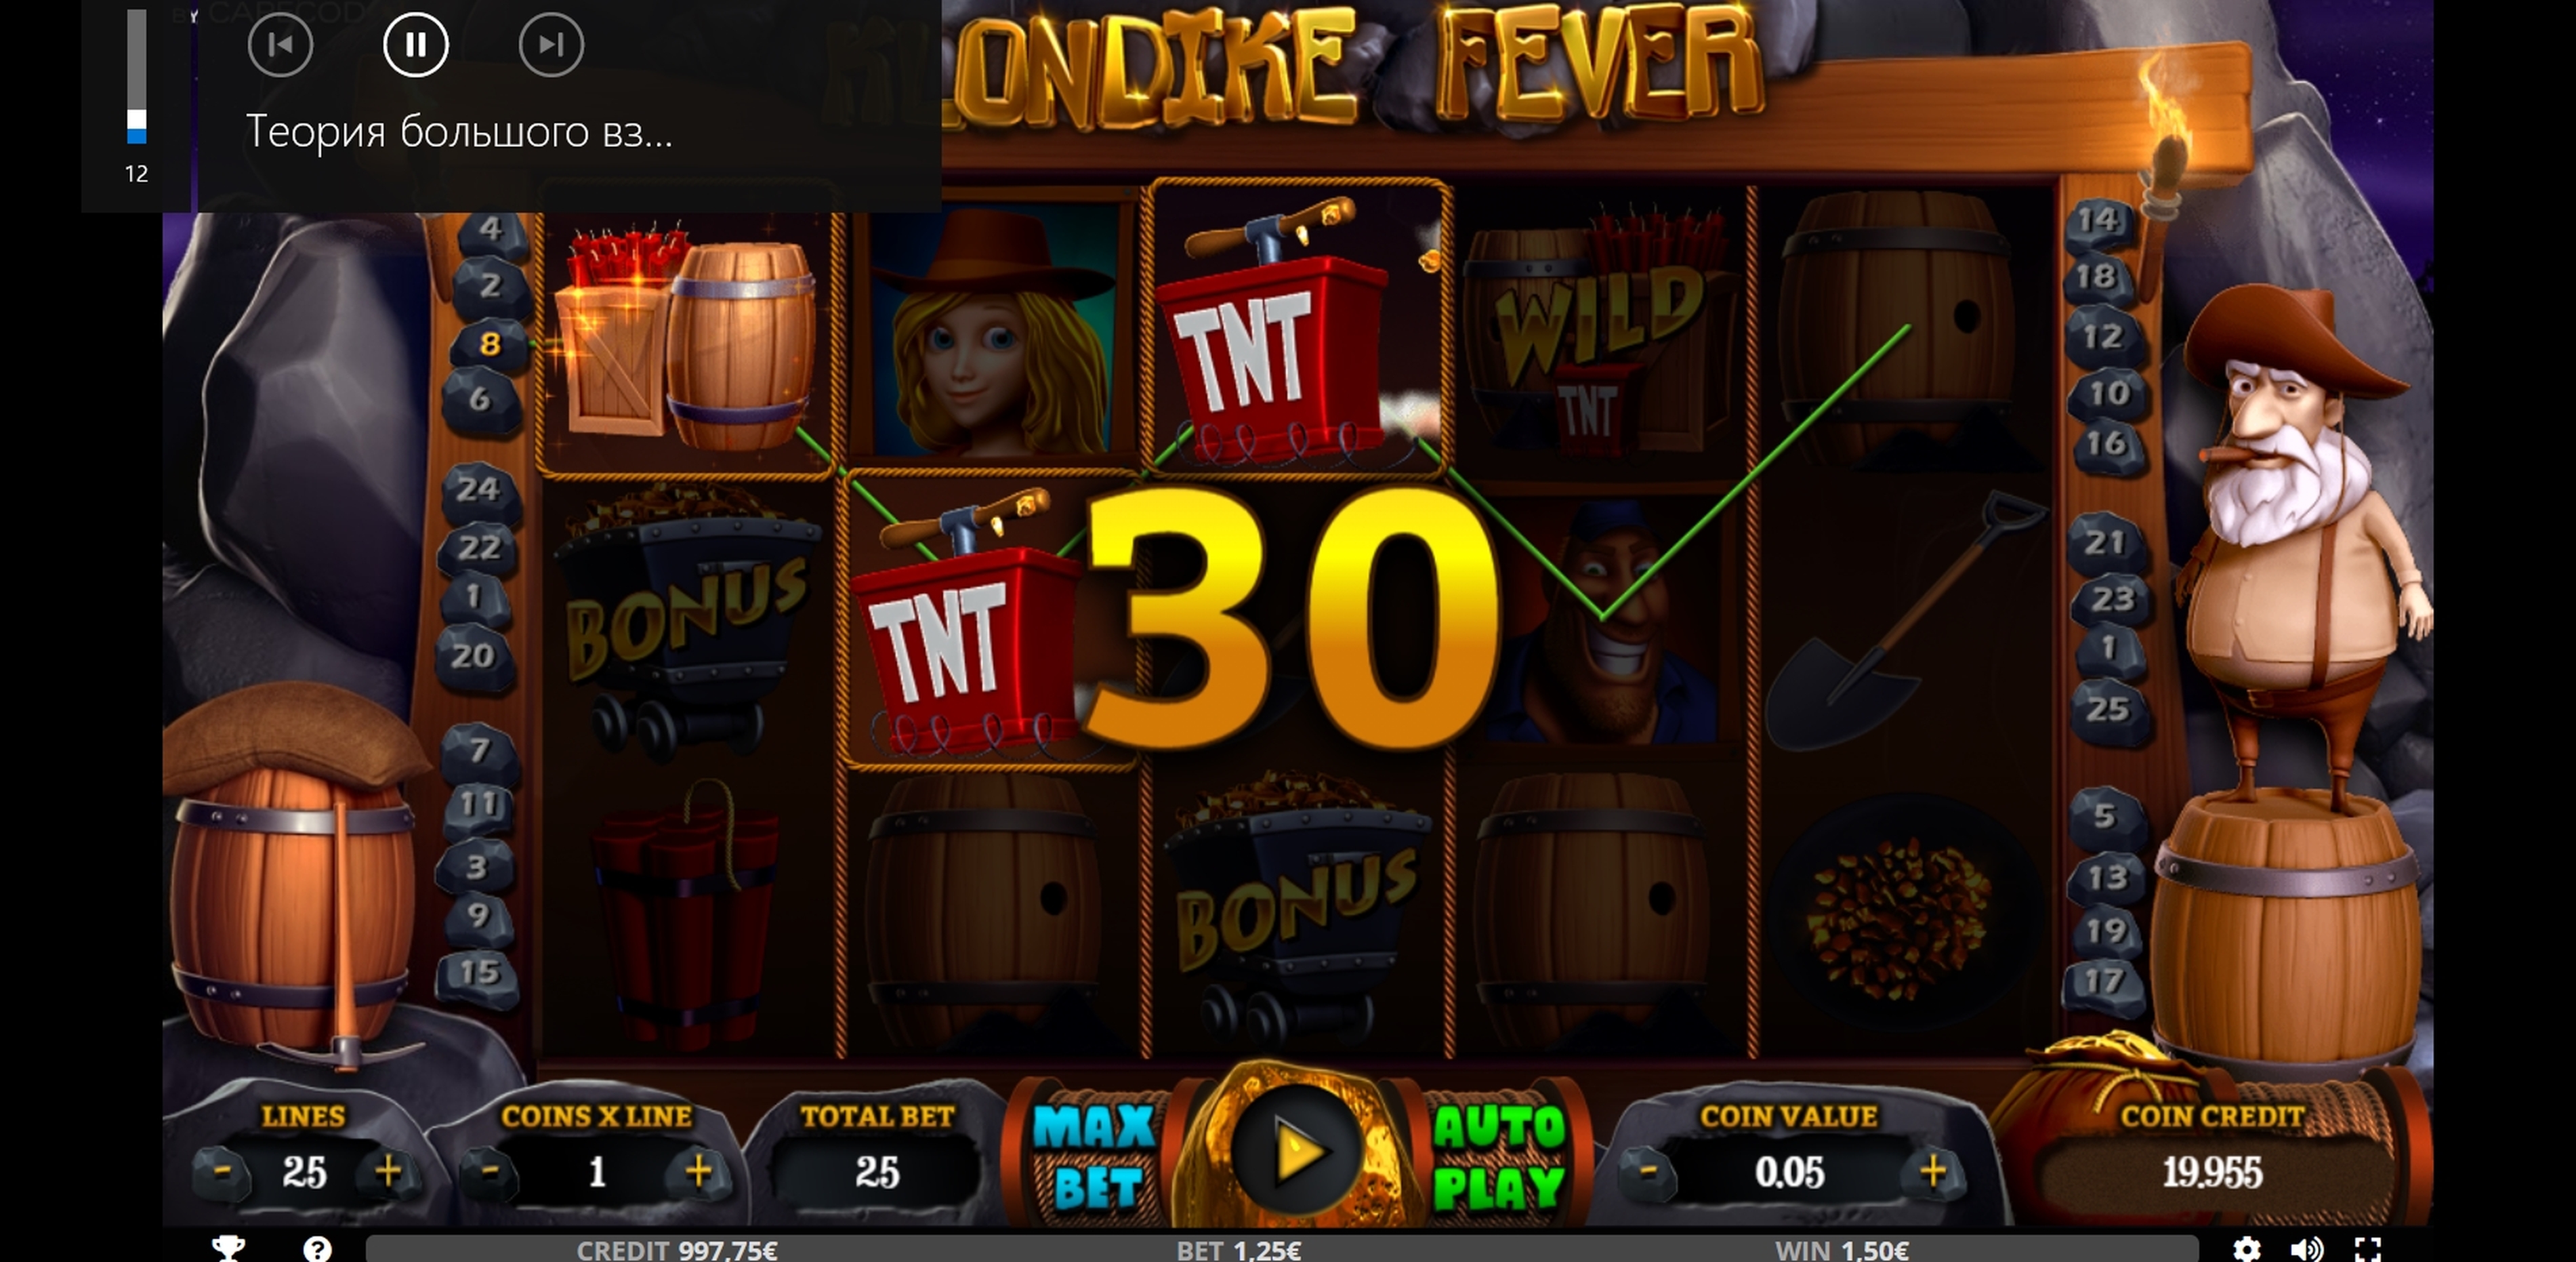 Win Money in Klondike Fever Free Slot Game by Capecod Gaming